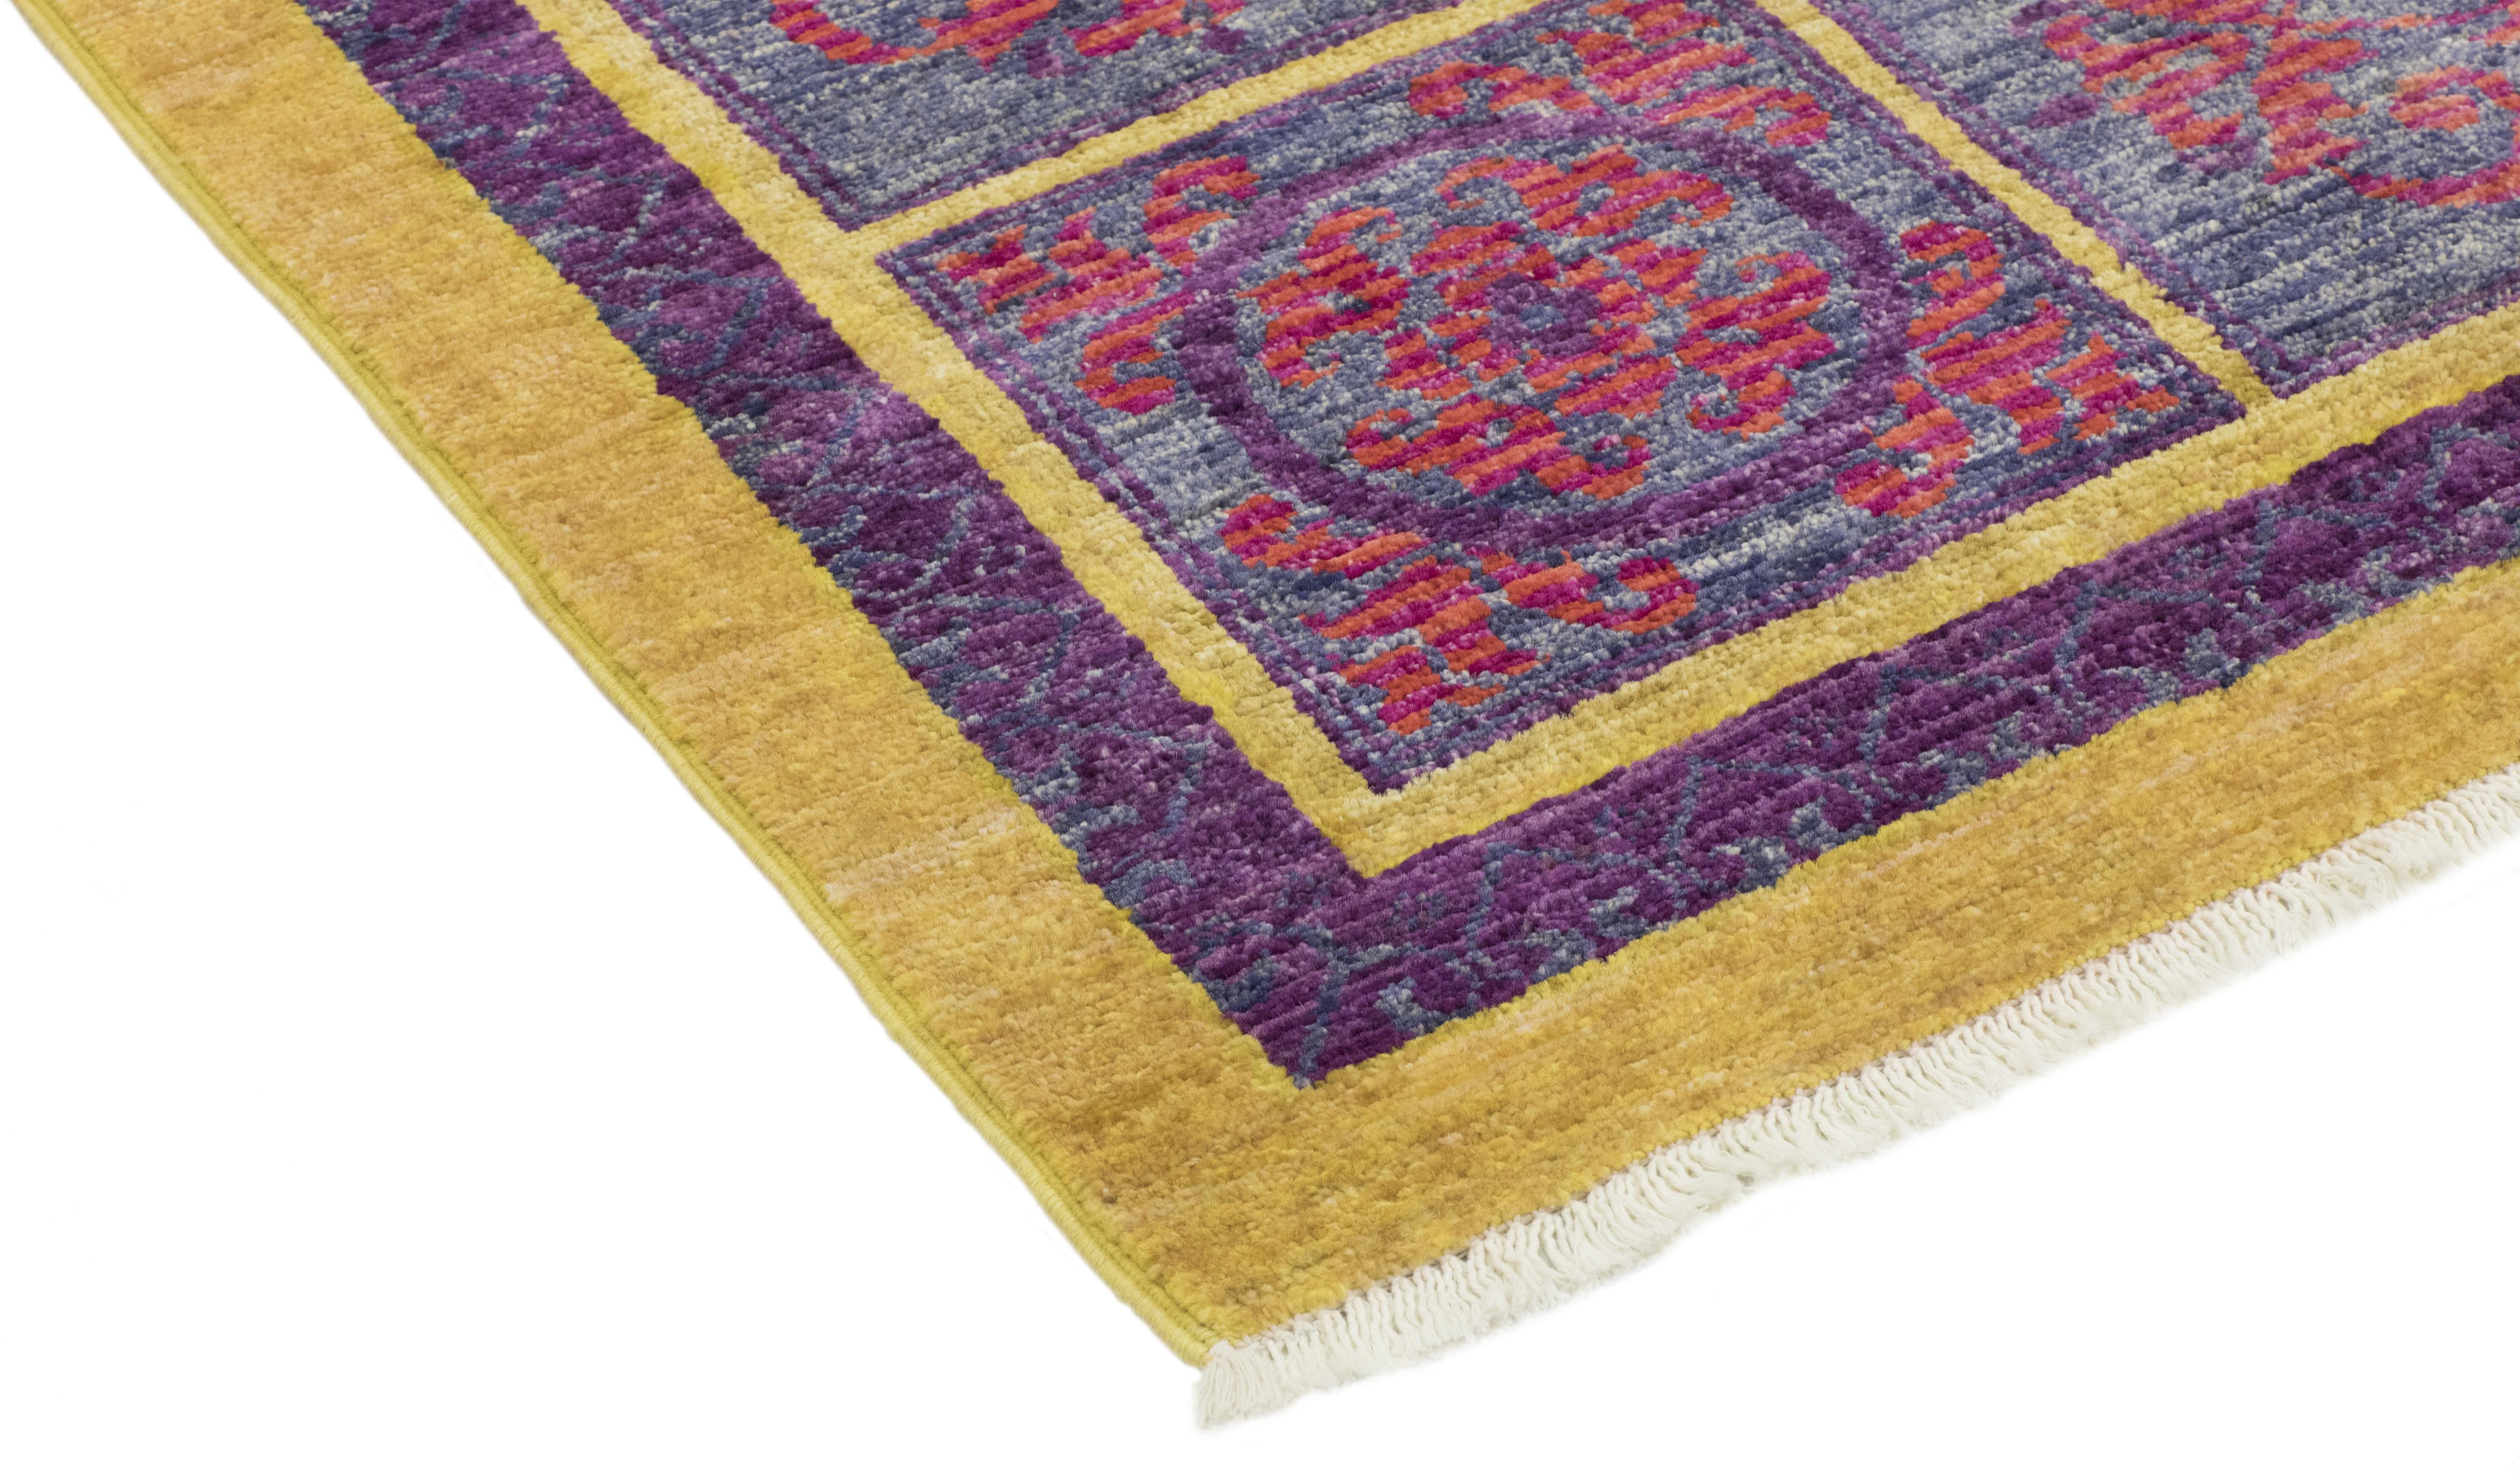 Color: Multi - Made In: Pakistan. 100% Wool. Whether boasting a field of flowers or ancient tribal symbols, patterned rugs are the easiest way to enrich a space. Subtle colors and intricate motifs reinforce the quiet sophistication of a traditional